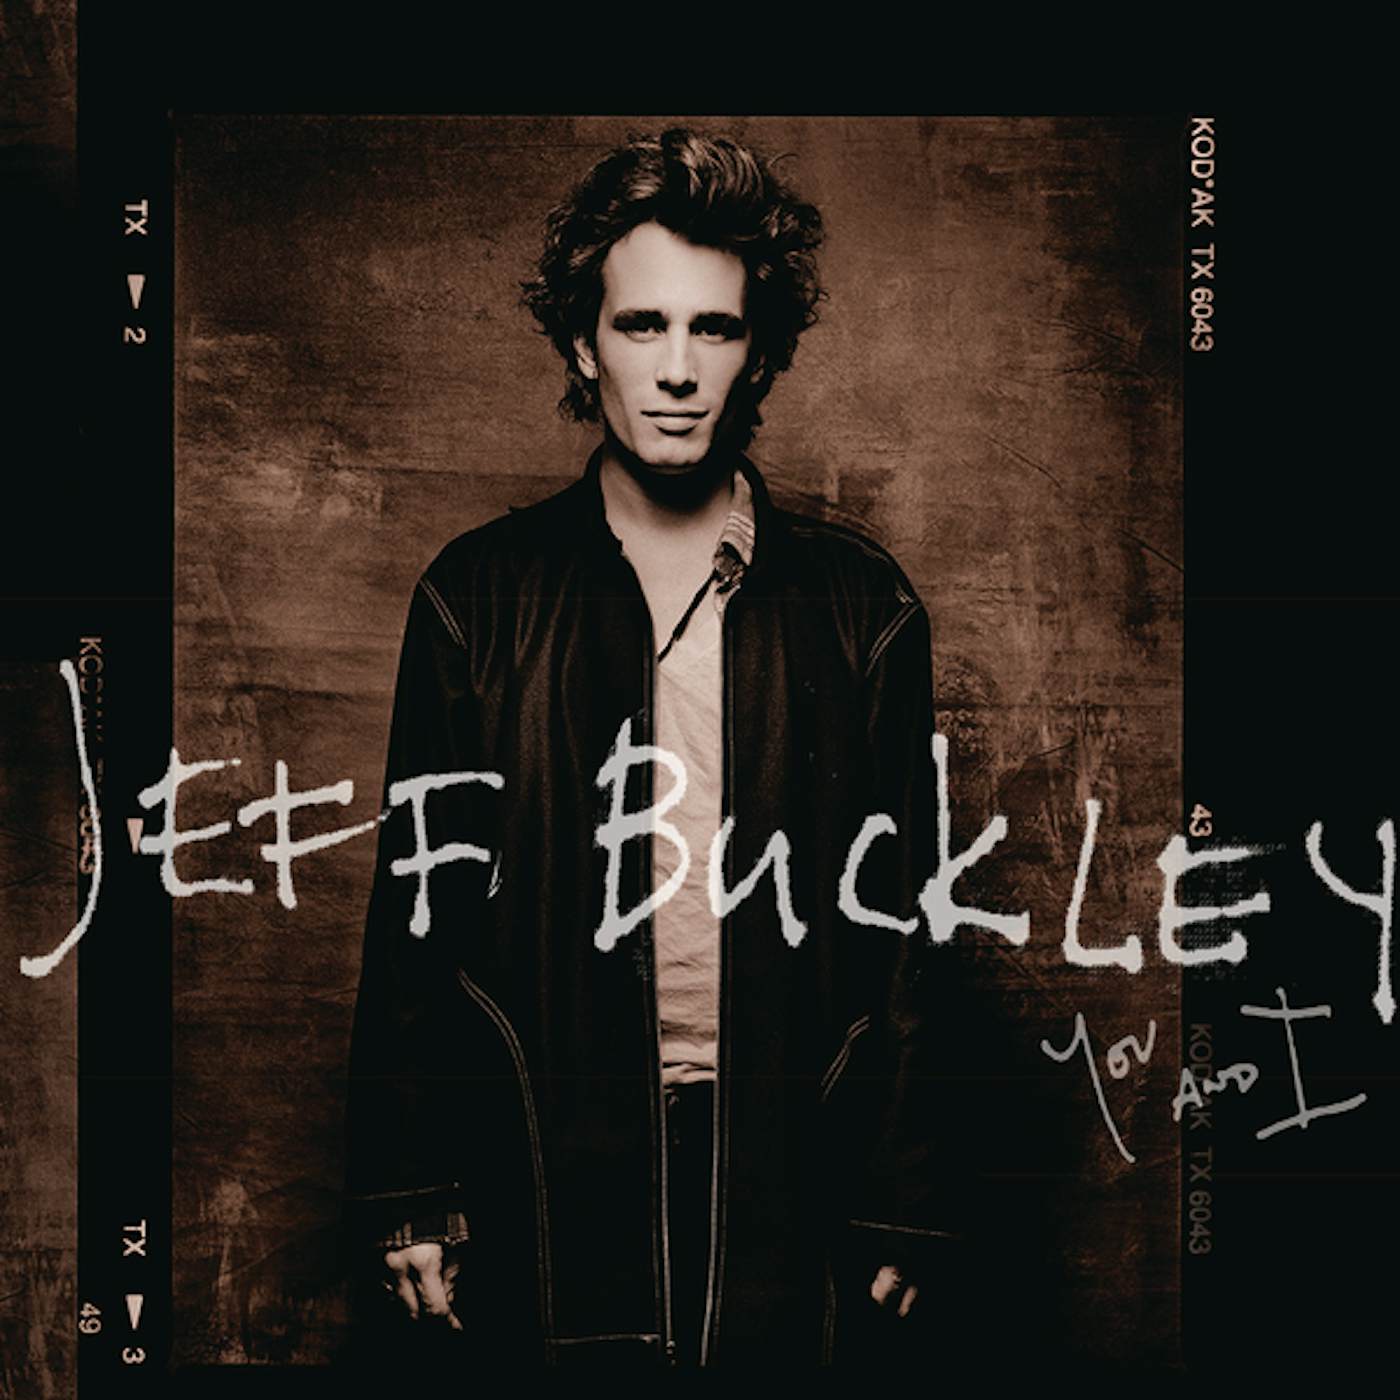 Jeff Buckley YOU AND I Vinyl Record